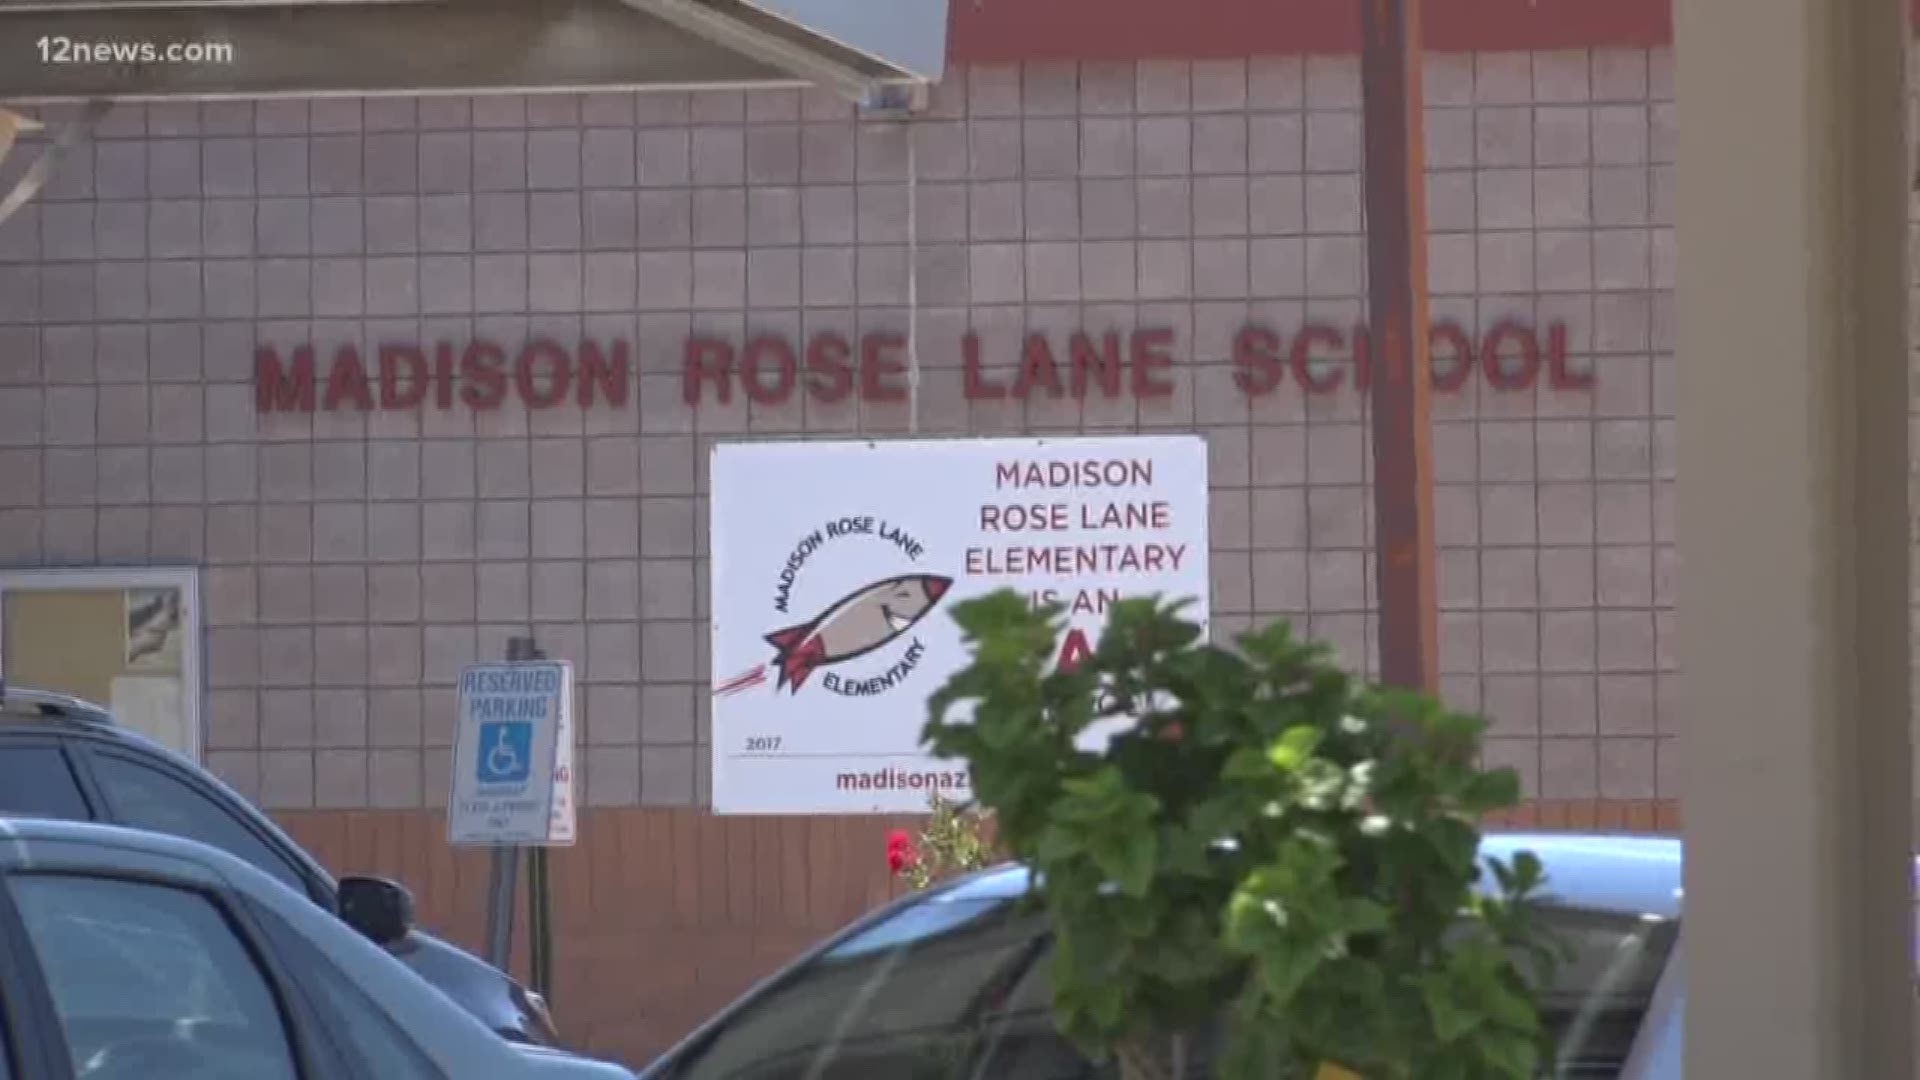 Parents of students at Madison Rose Lane Elementary School received a letter informing them that a student brought a gun to school in her backpack. The student told the school that she grabbed the wrong backpack at home and accidentally brought the gun campus.